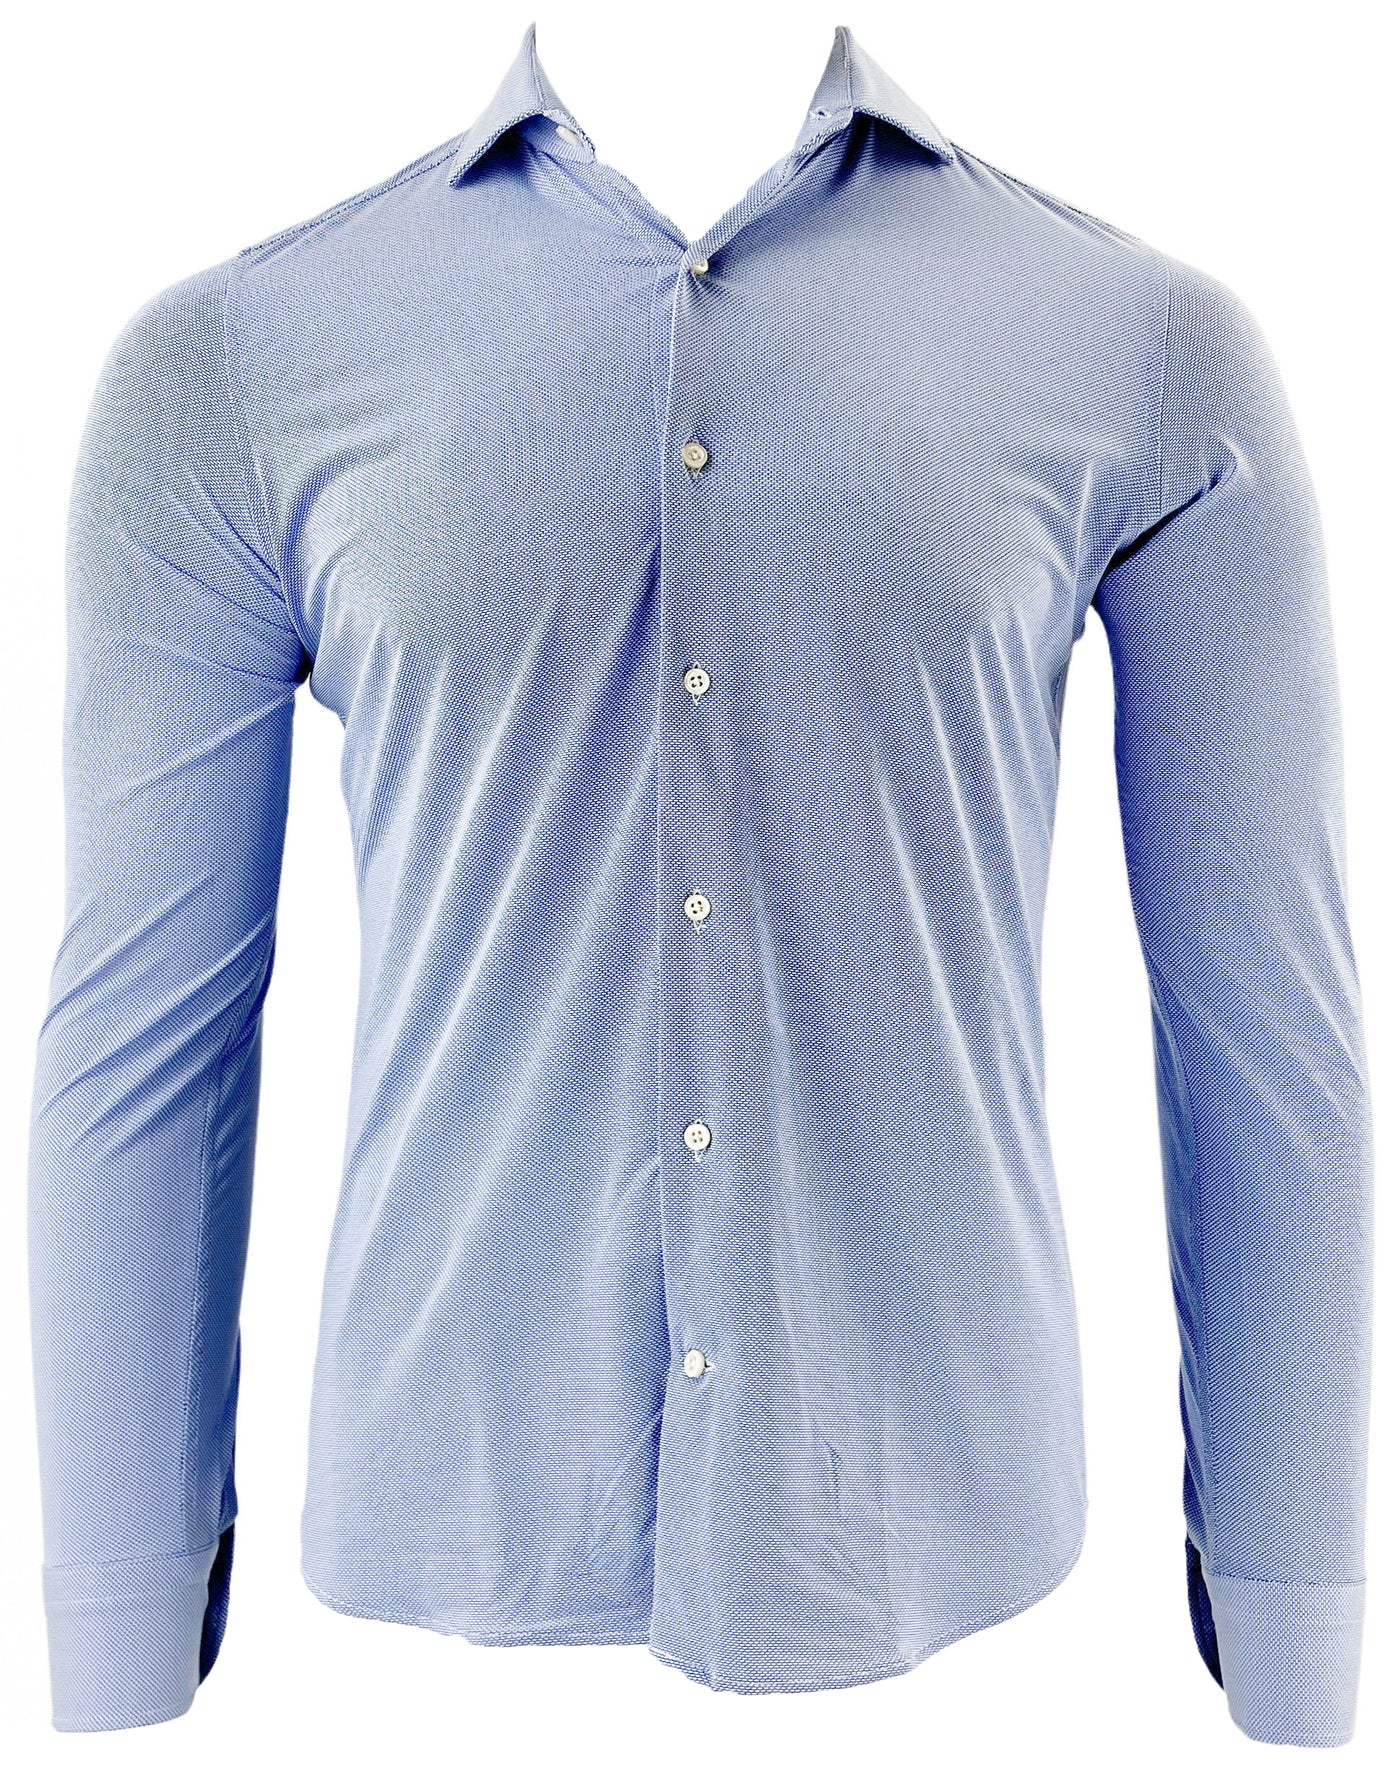 ORDEAN Stretch Button Down in Dark Blue - Discounts on ORDEAN at UAL